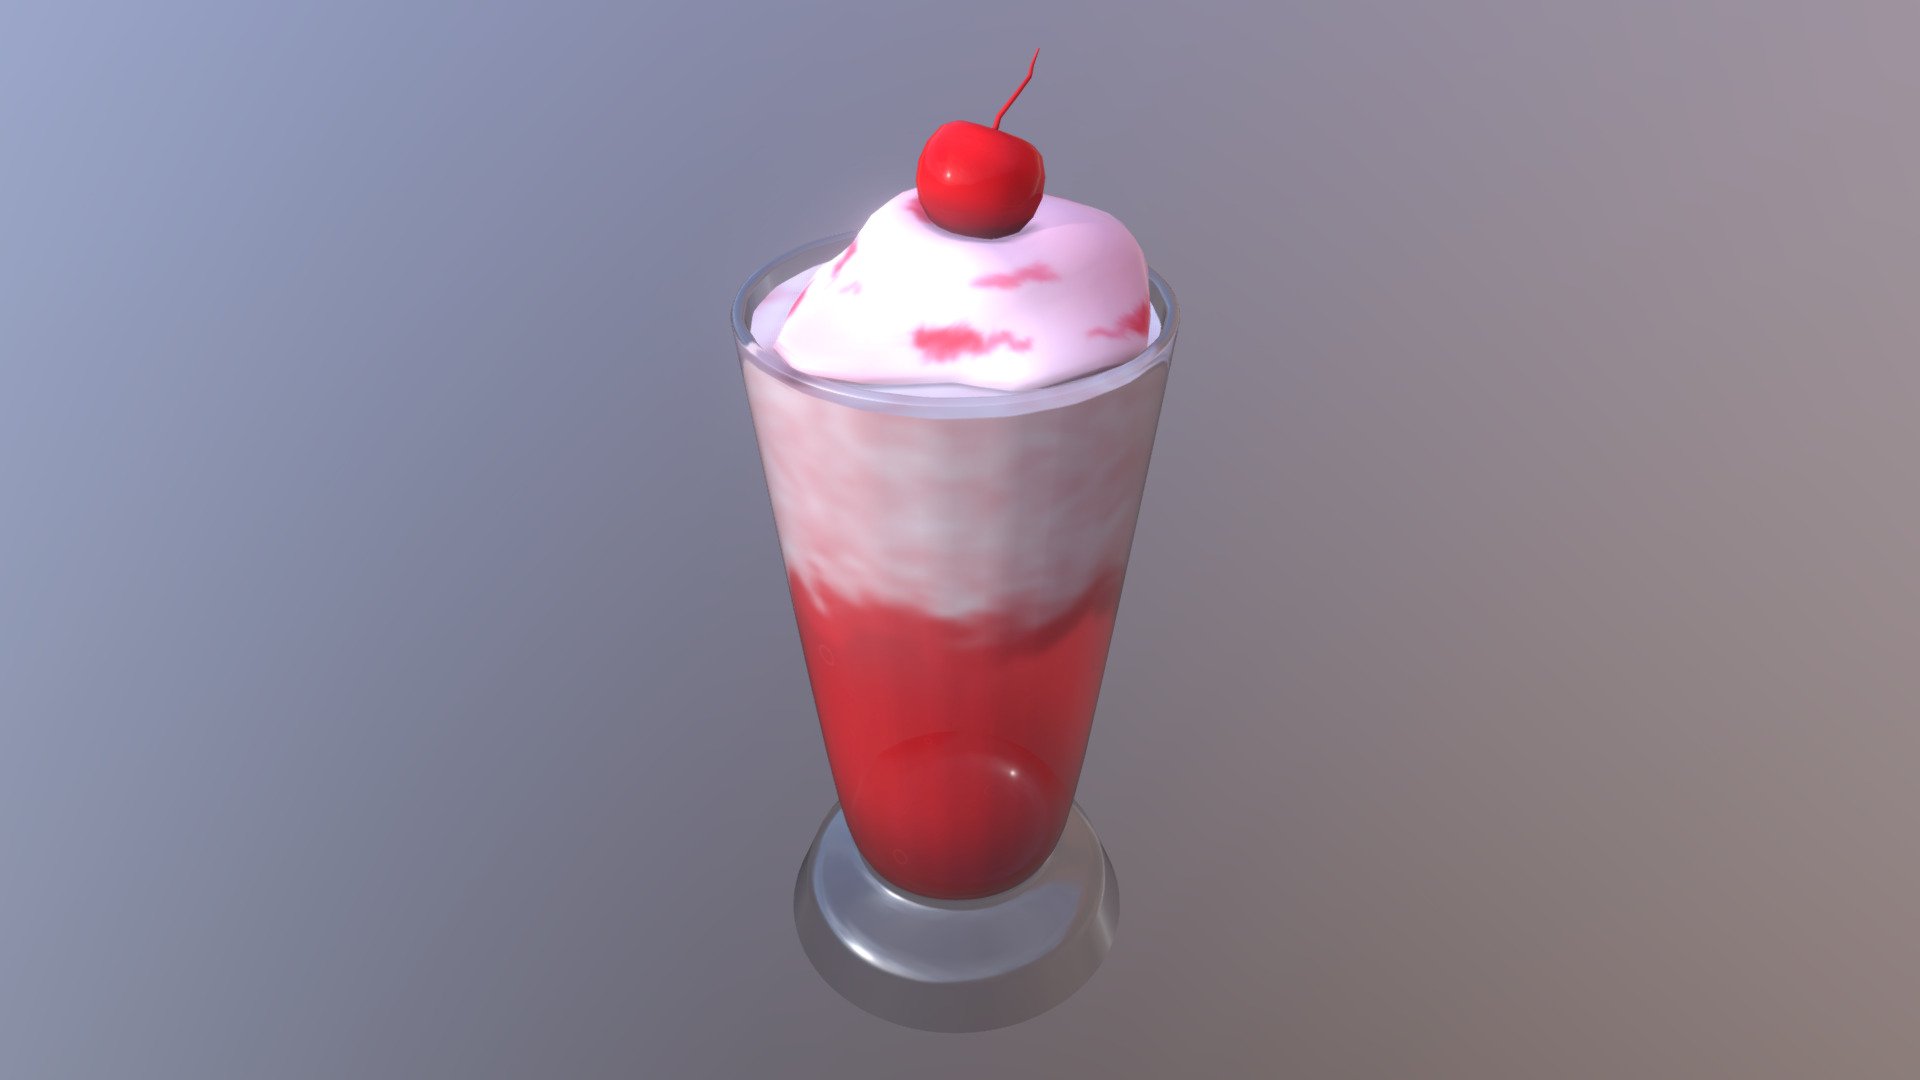 Who doesn't love a nice cold soda with an scoop of ice cream to sweeten the deal. The maraschino cherry on top is just a plus! - Cherry Soda Float - Download Free 3D model by LittleWhiteElk 3d model